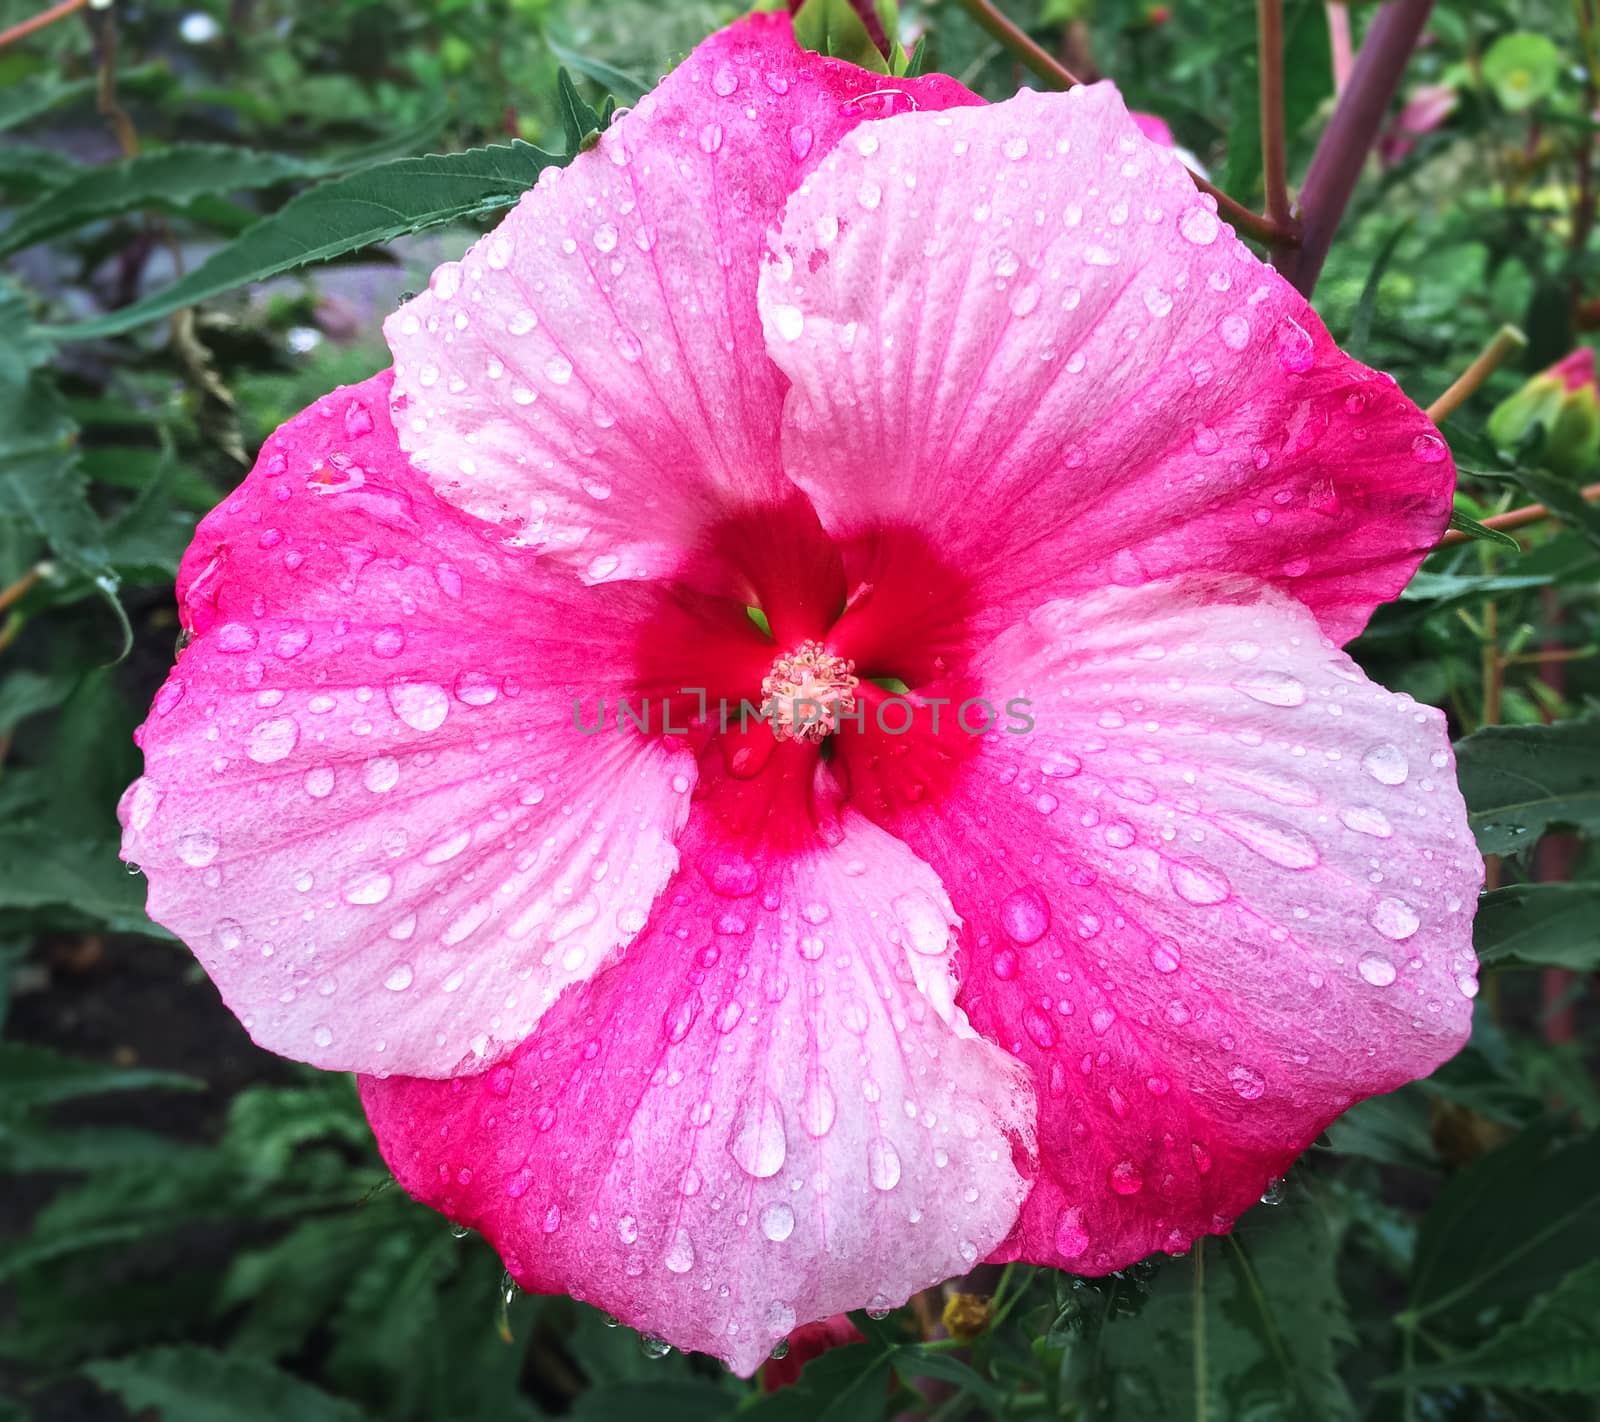 Close-up of a beautiful pink hibiscus flower in raindrops.